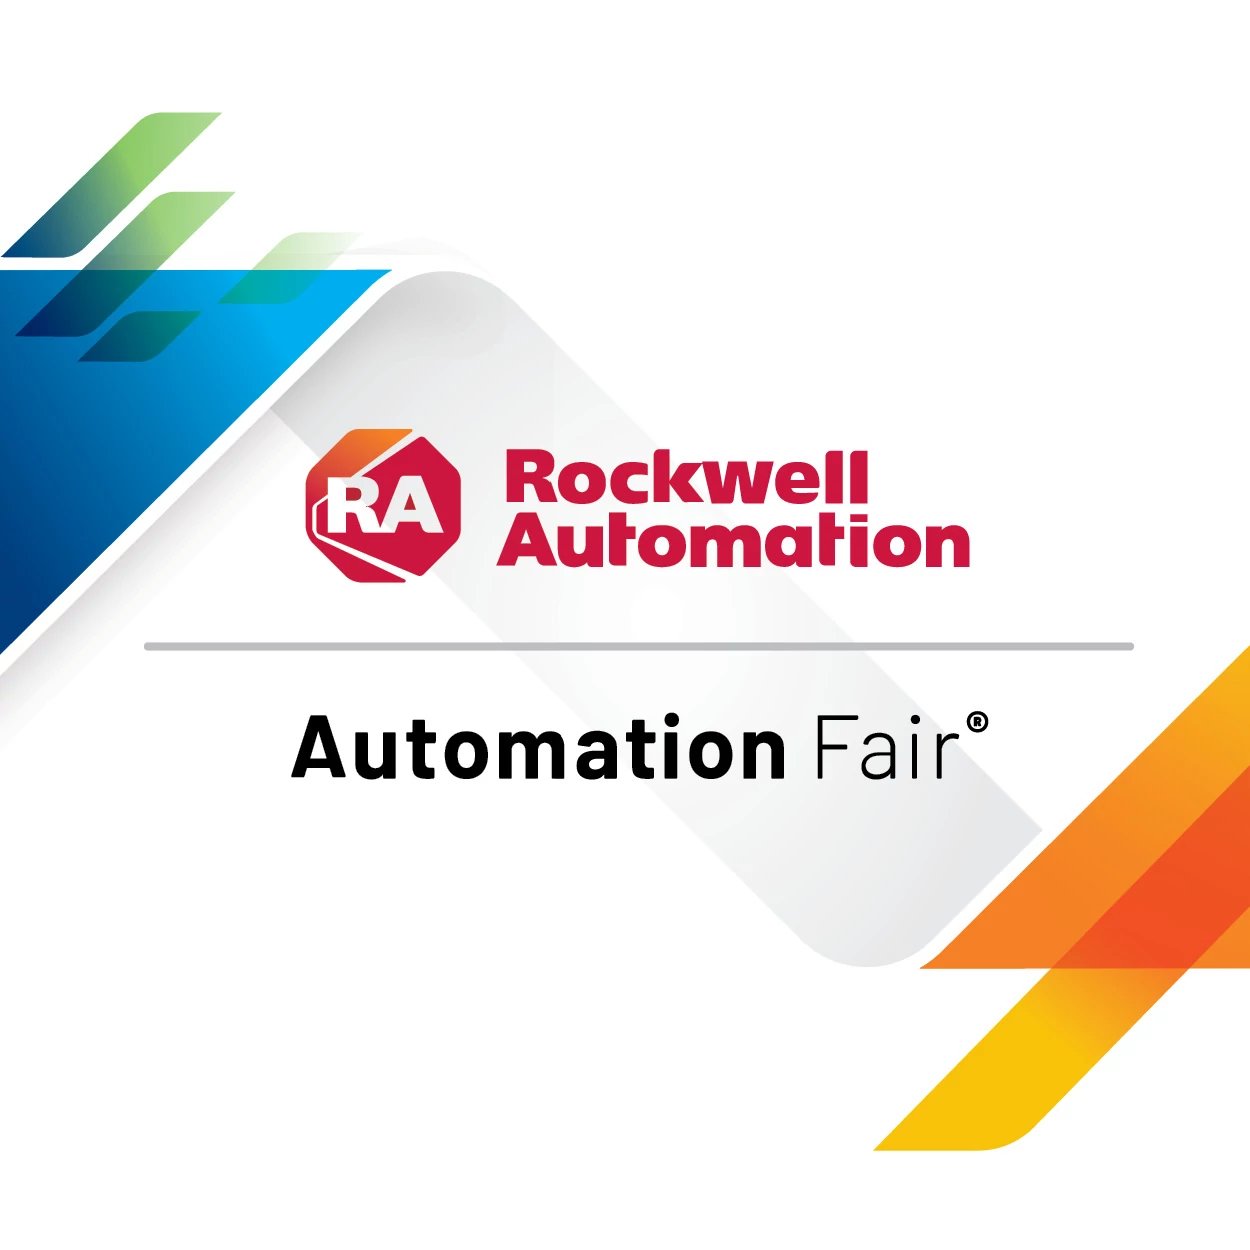 Automation Fair logo from Rockwell Automation